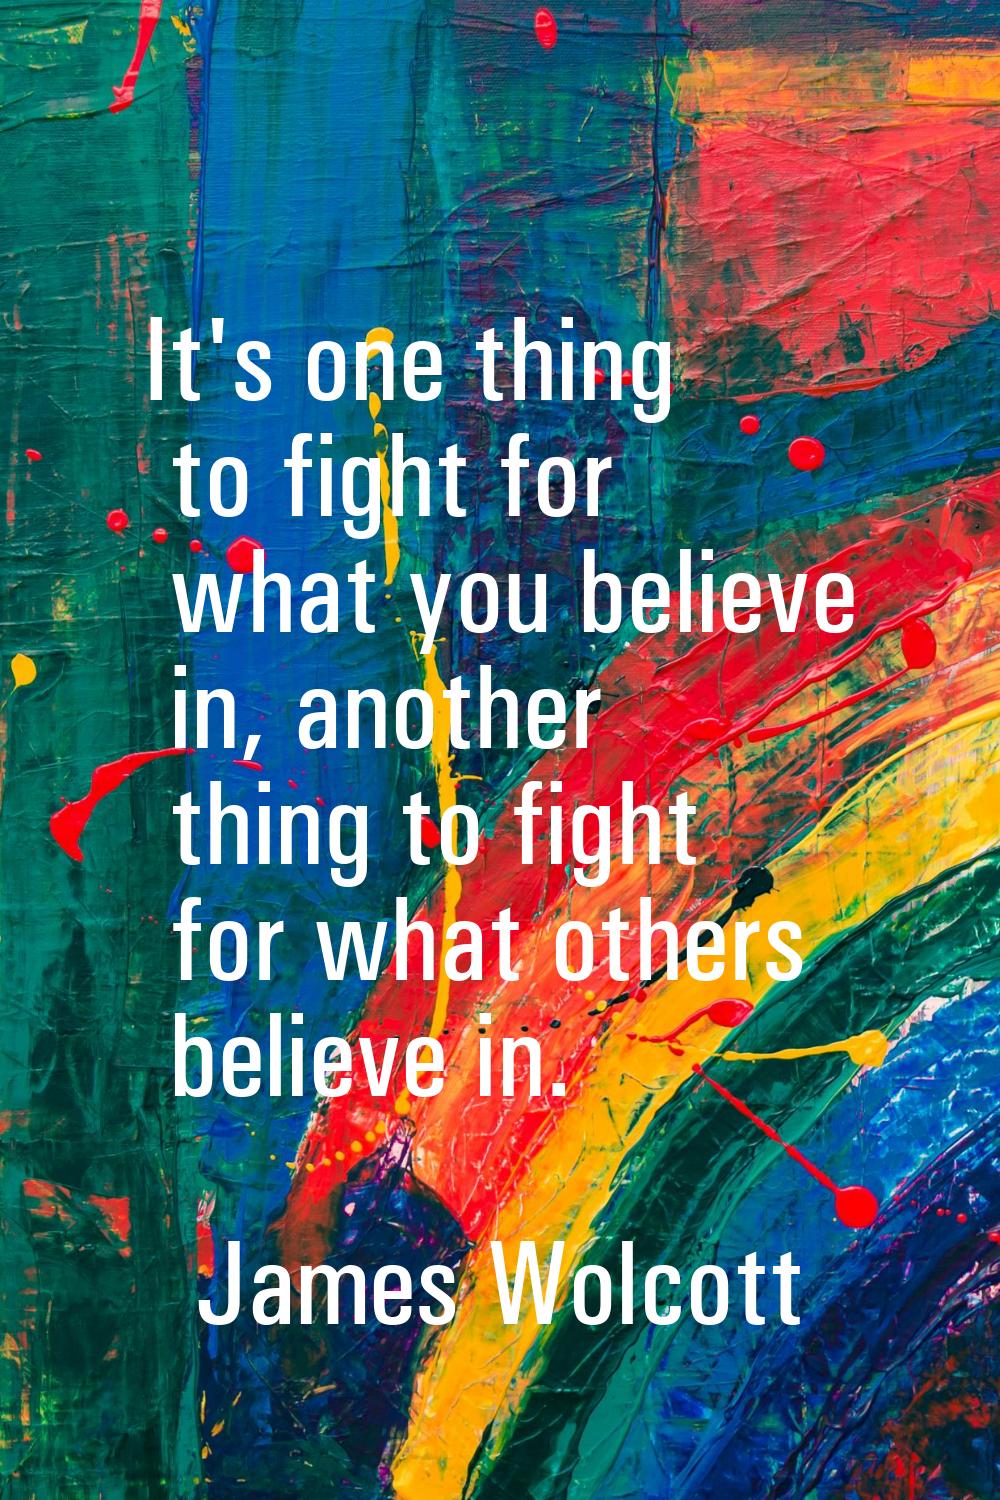 It's one thing to fight for what you believe in, another thing to fight for what others believe in.